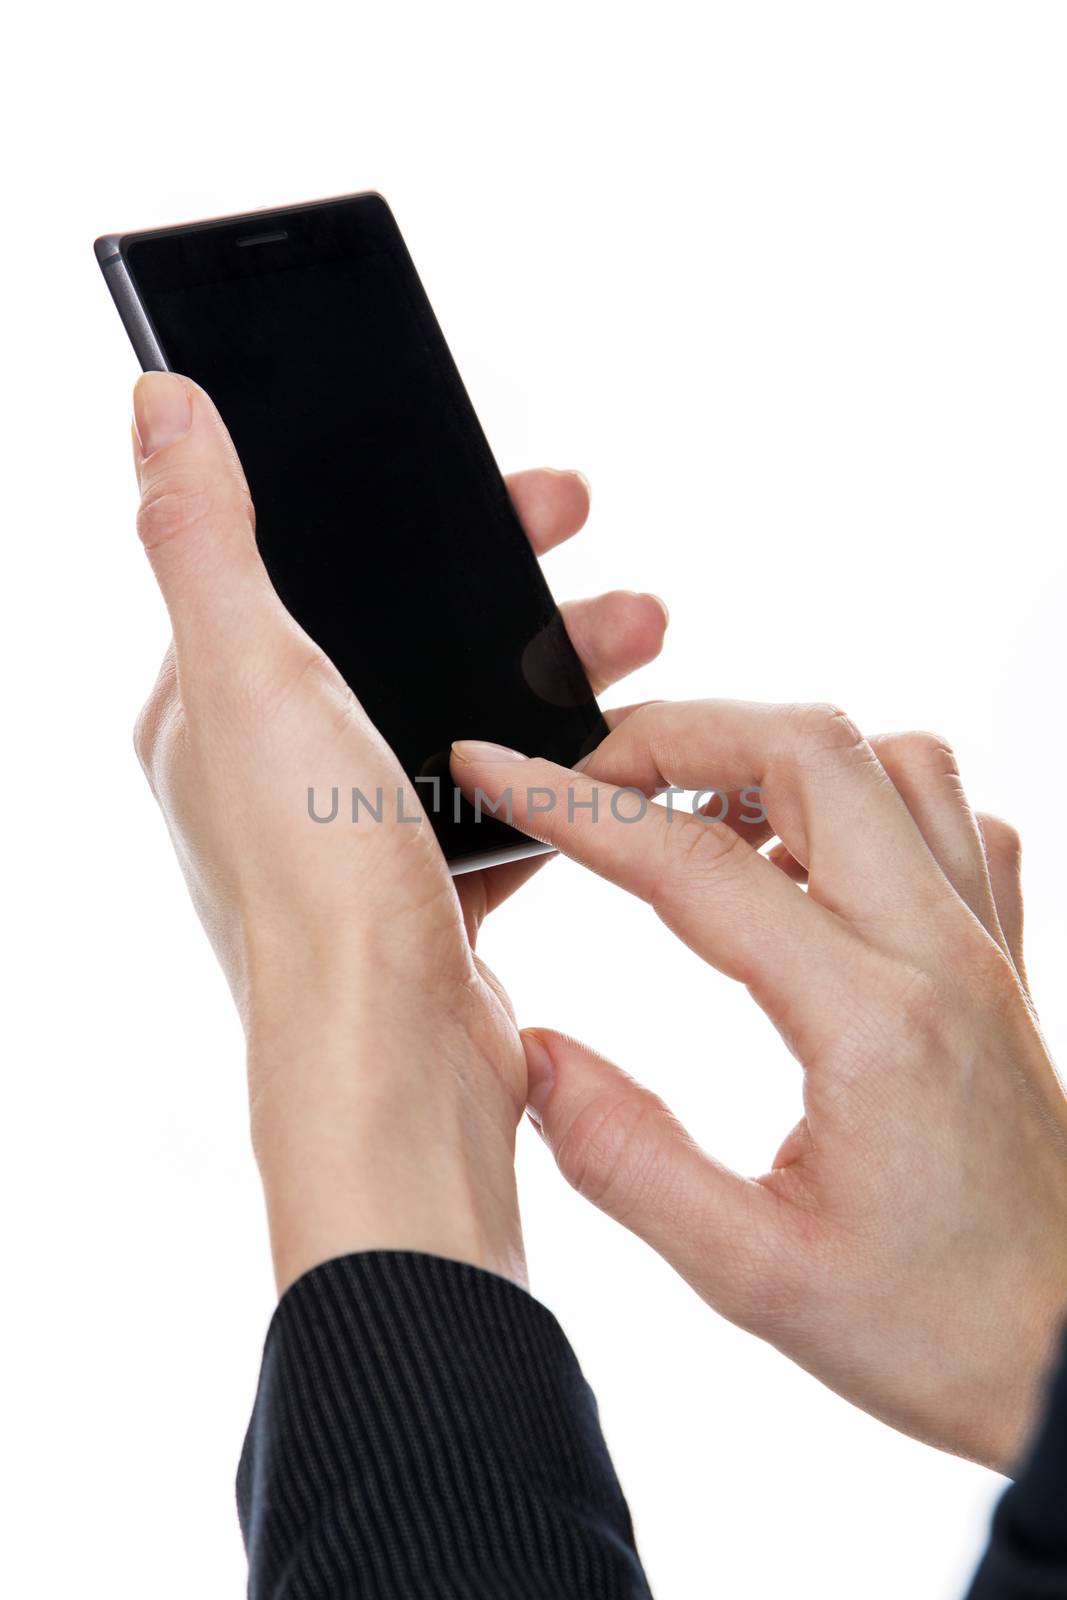 woman's hands dialling on a mobile phone